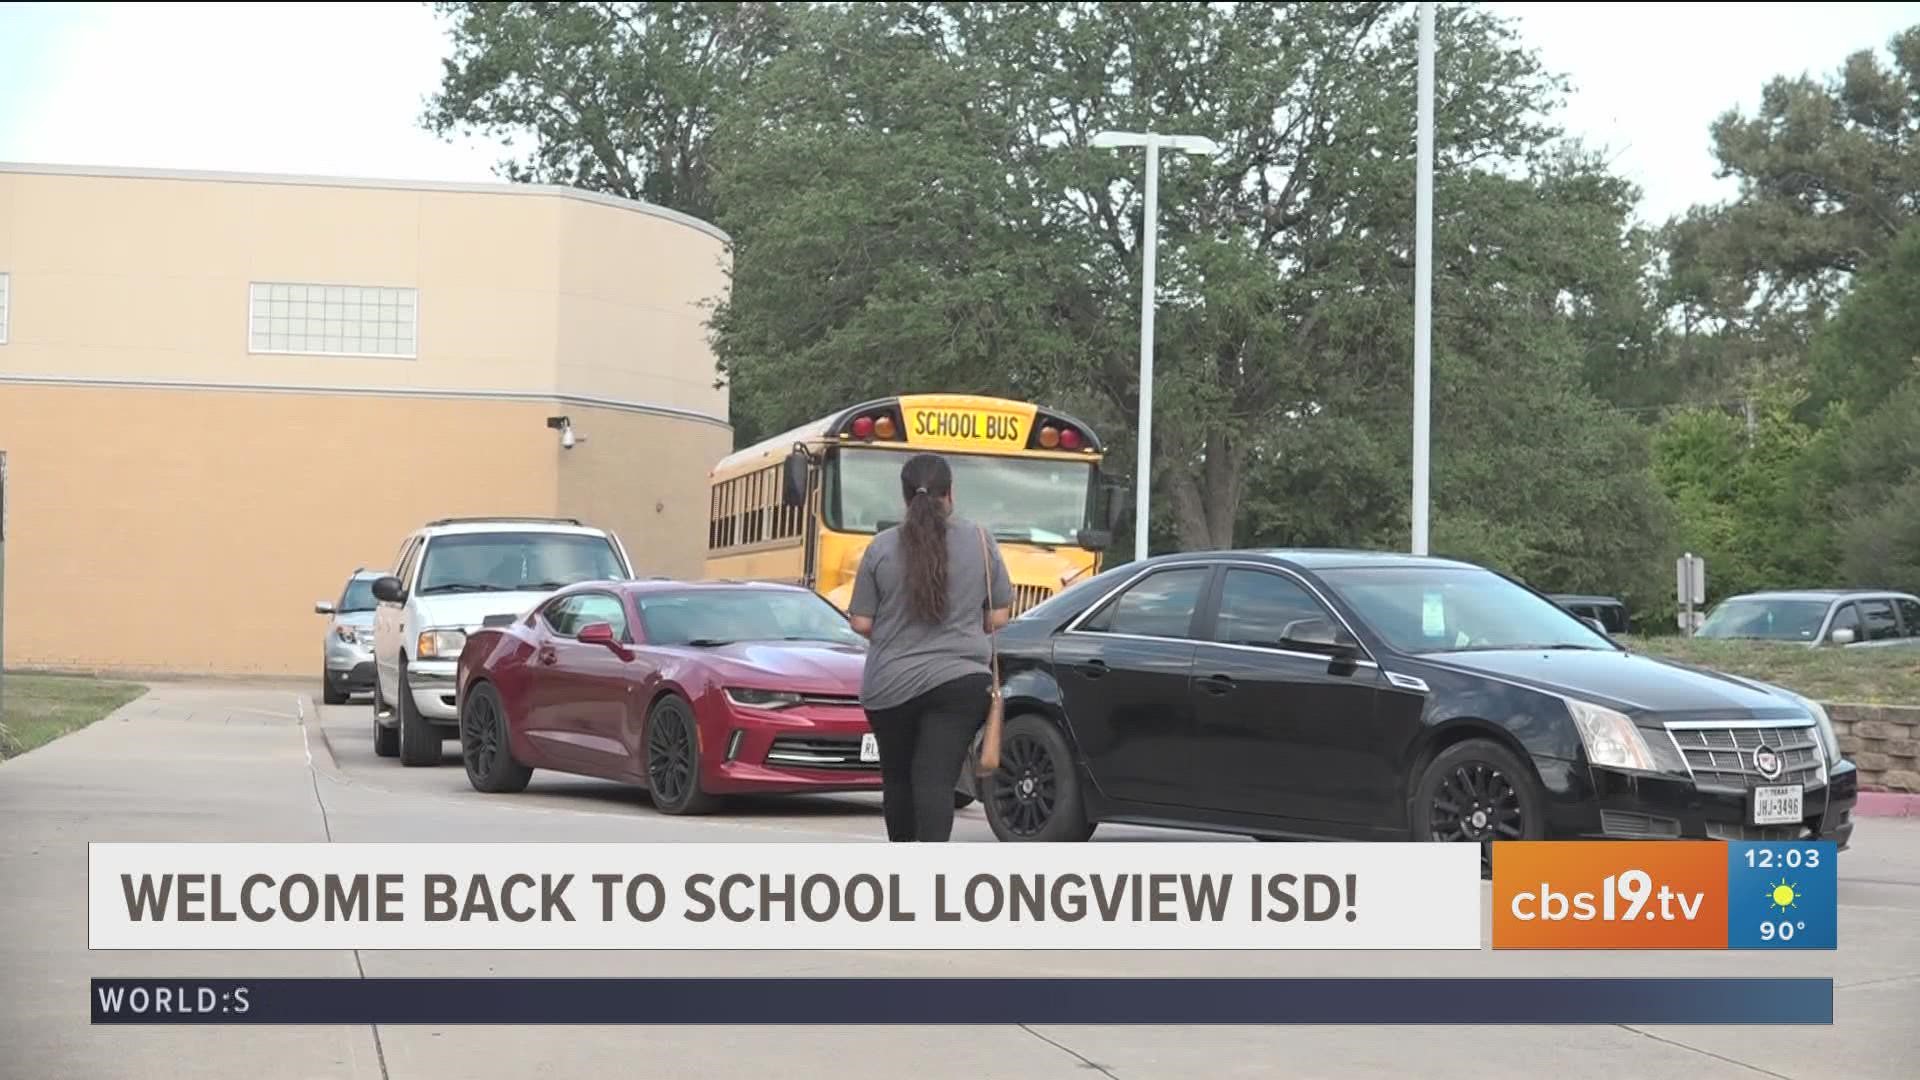 Students and parents got ready for the first day of school at Longview ISD